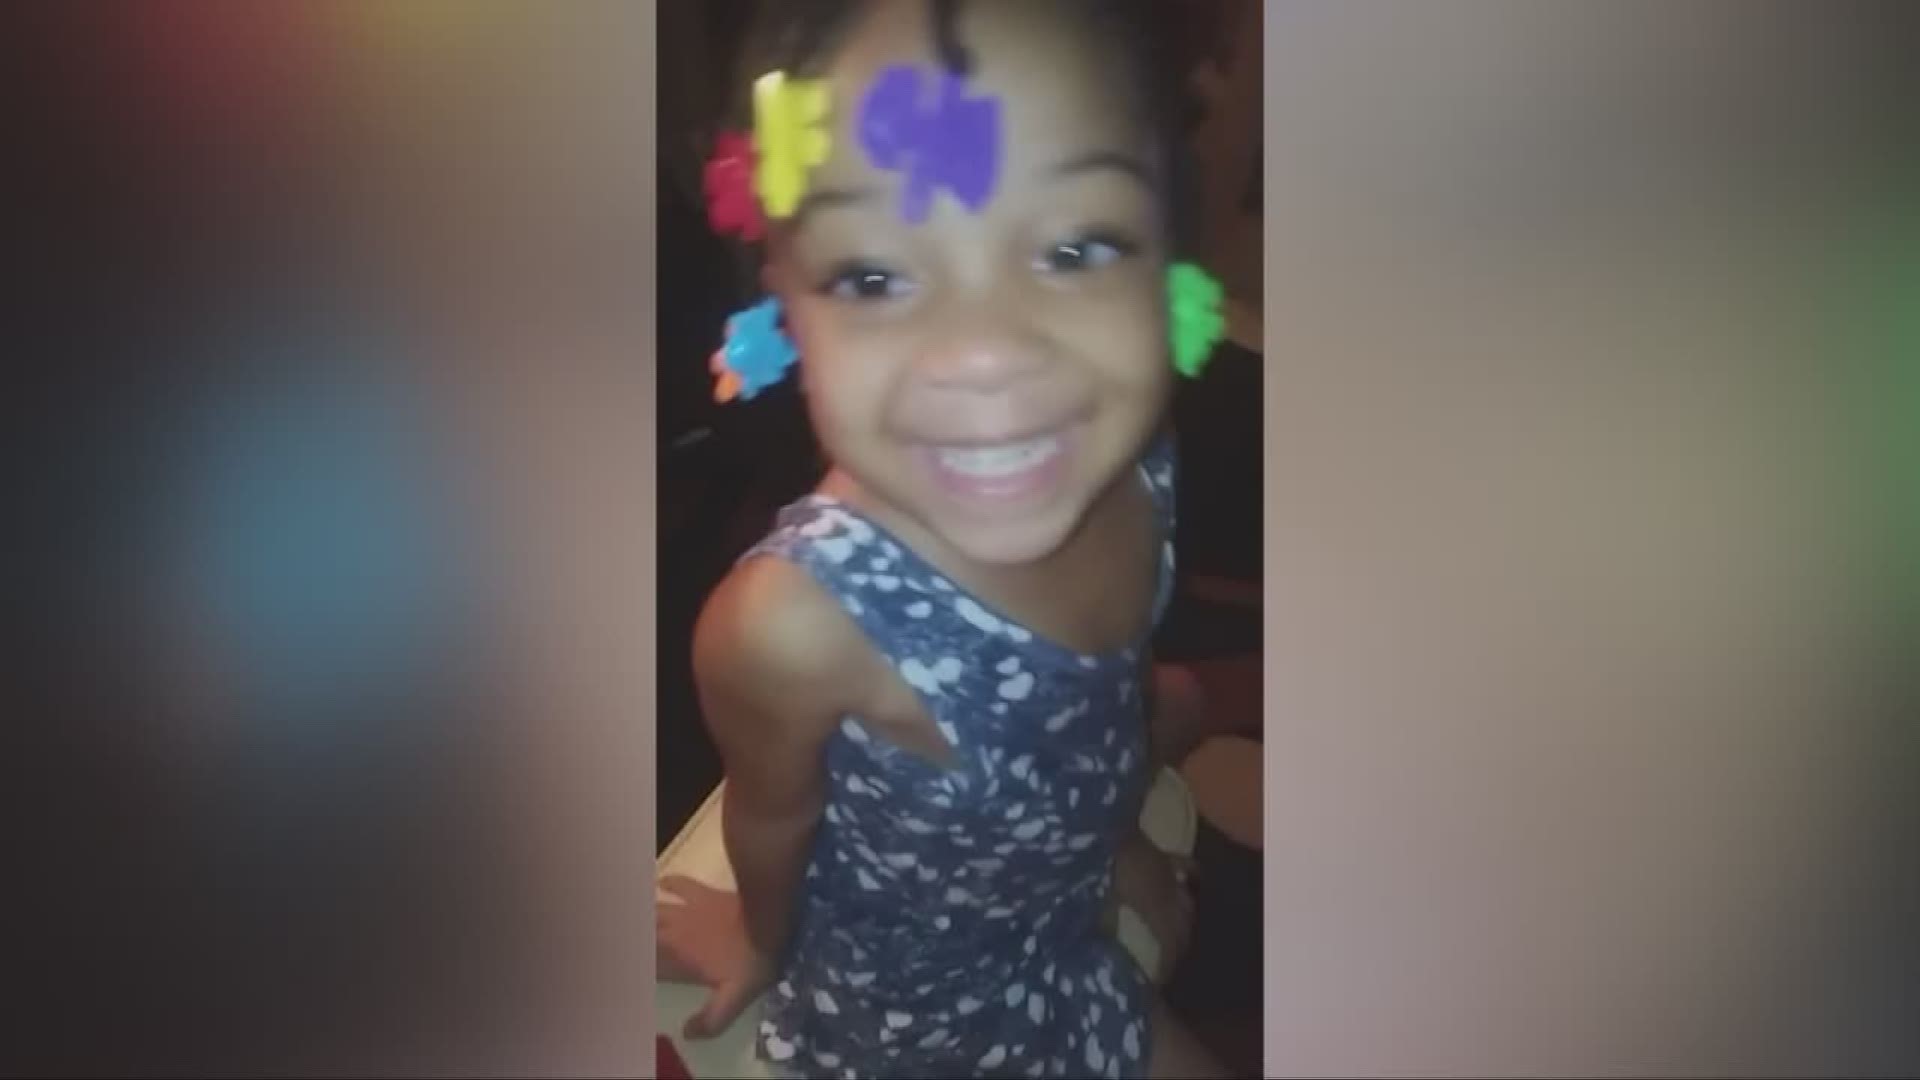 State has no reports of abuse against Aniya Day